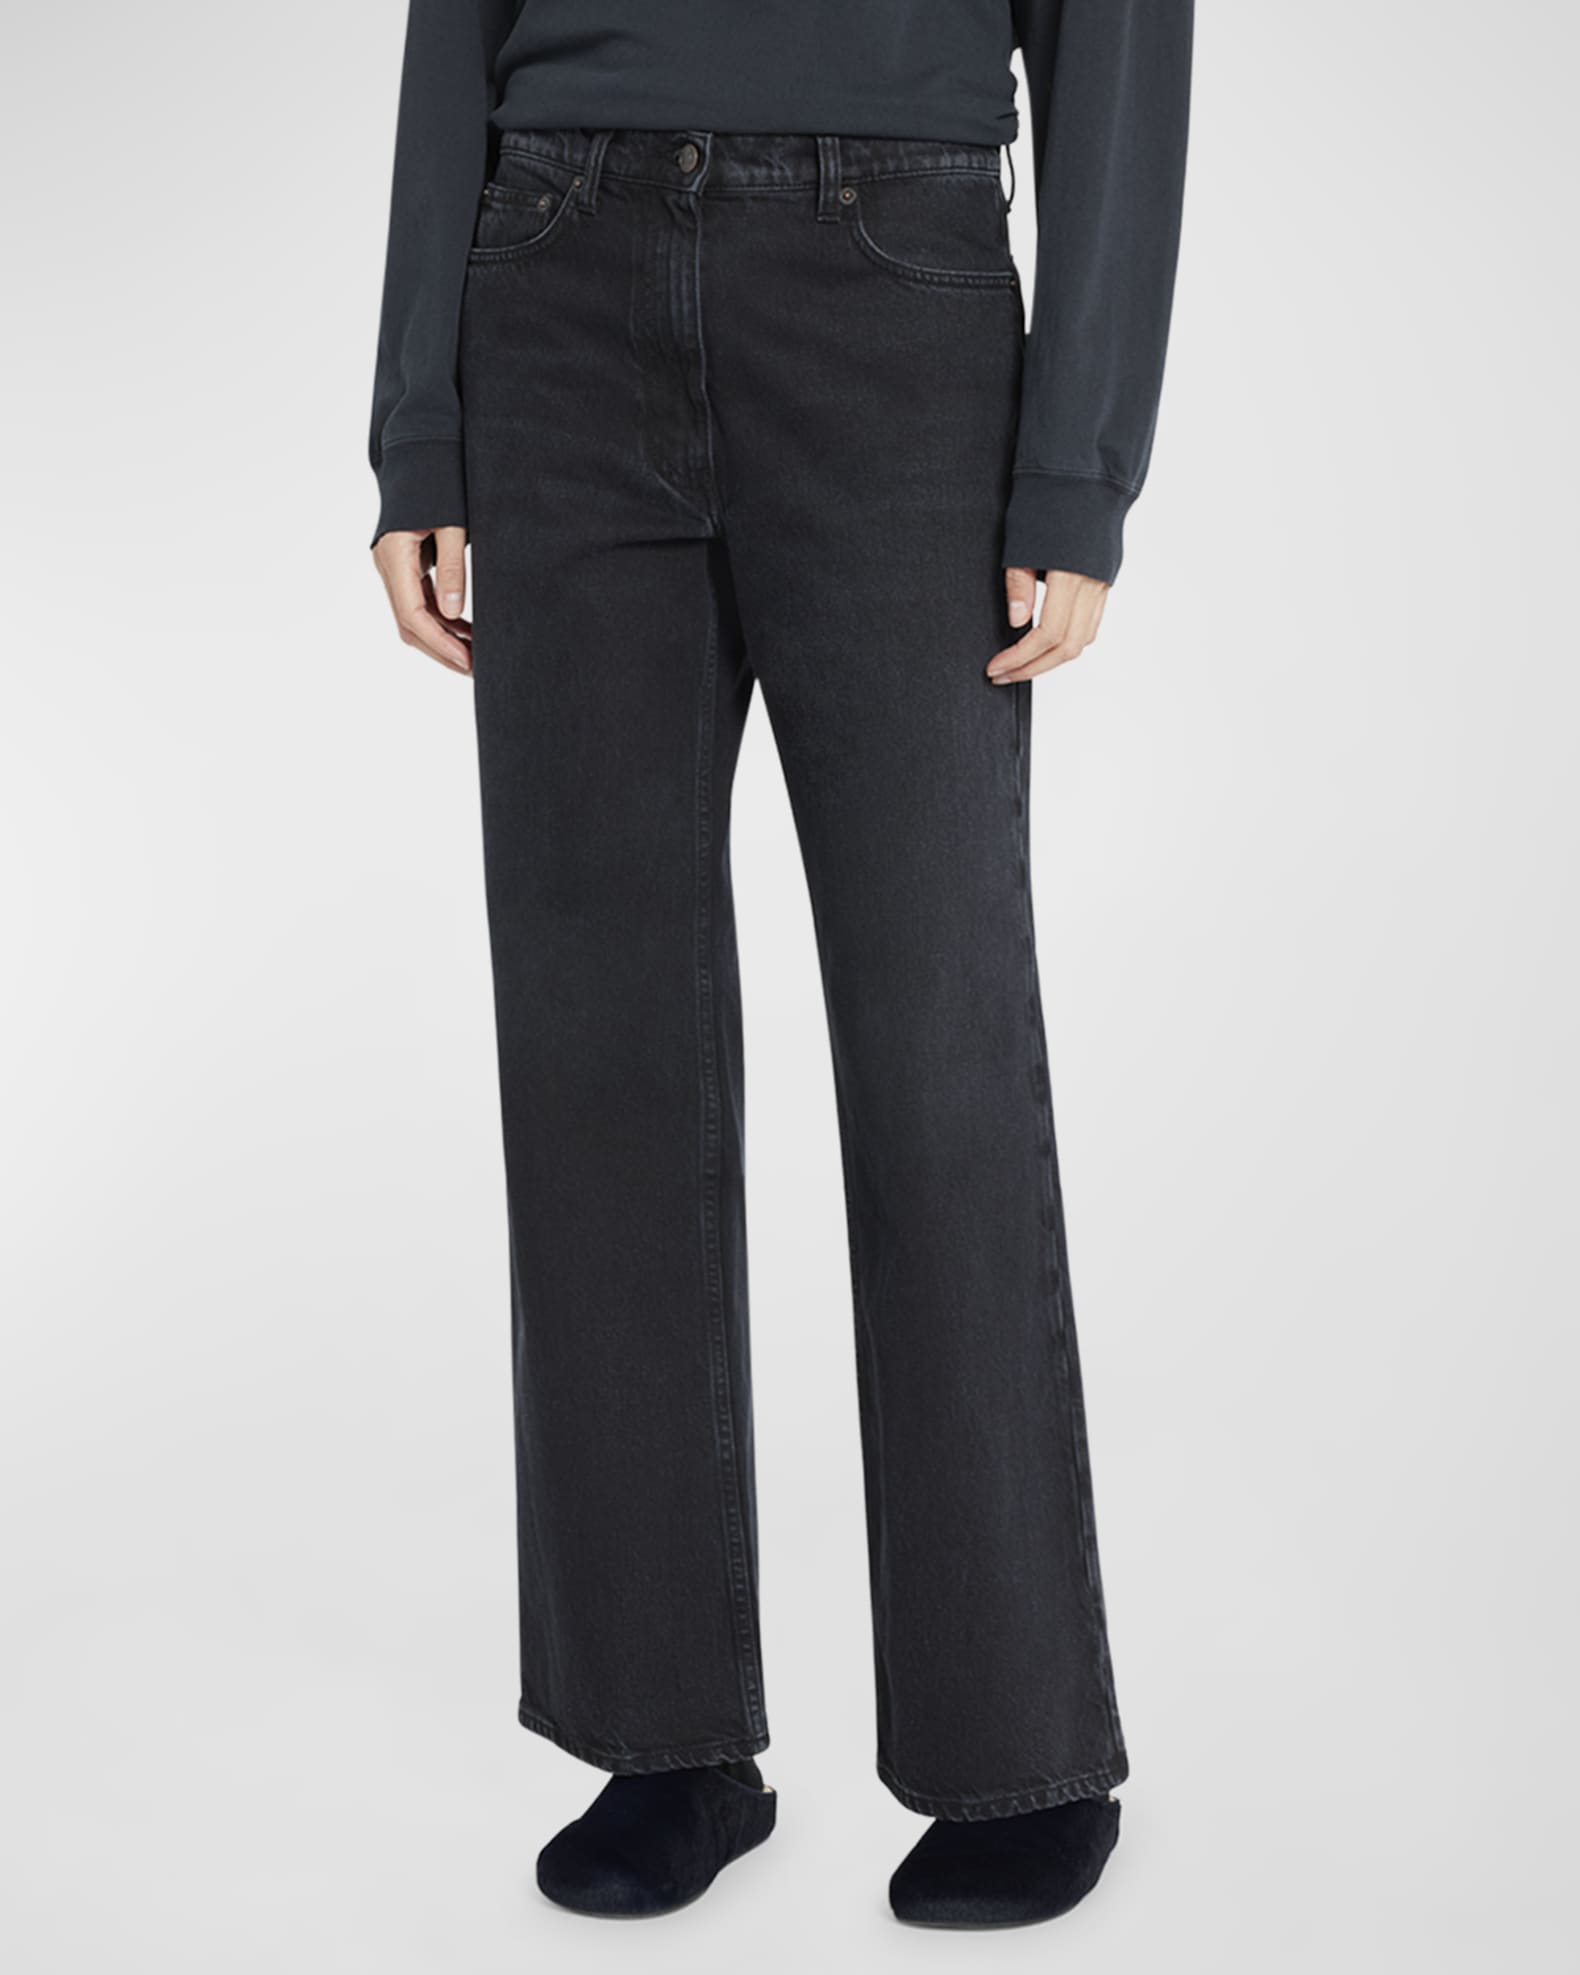 Dan flared jeans in black - The Row